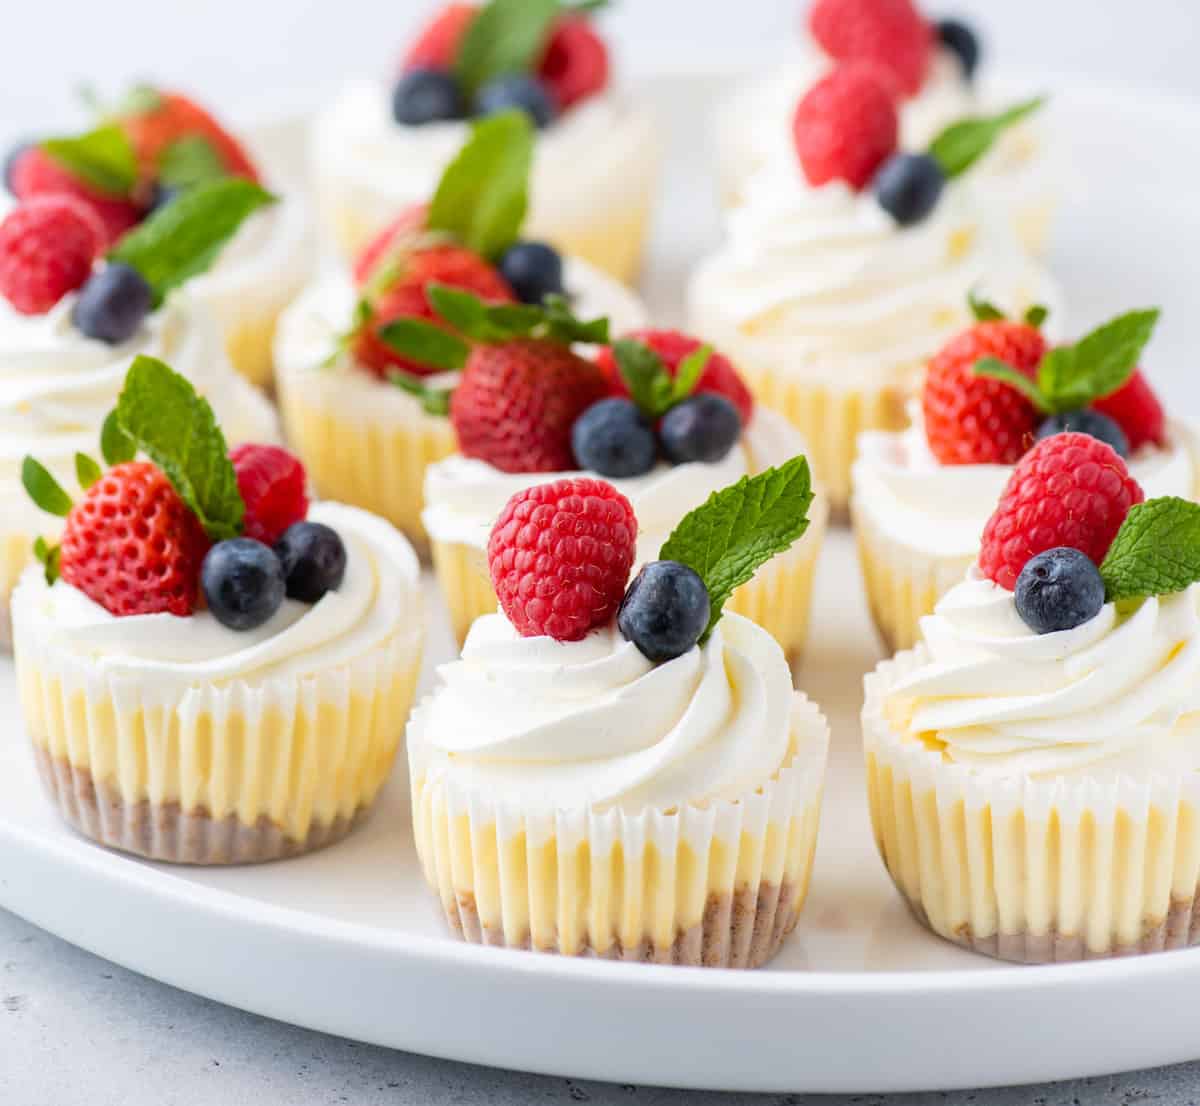 Serving tray of mini cheesecakes garnished with whipped cream, fresh berries, and mint leaves